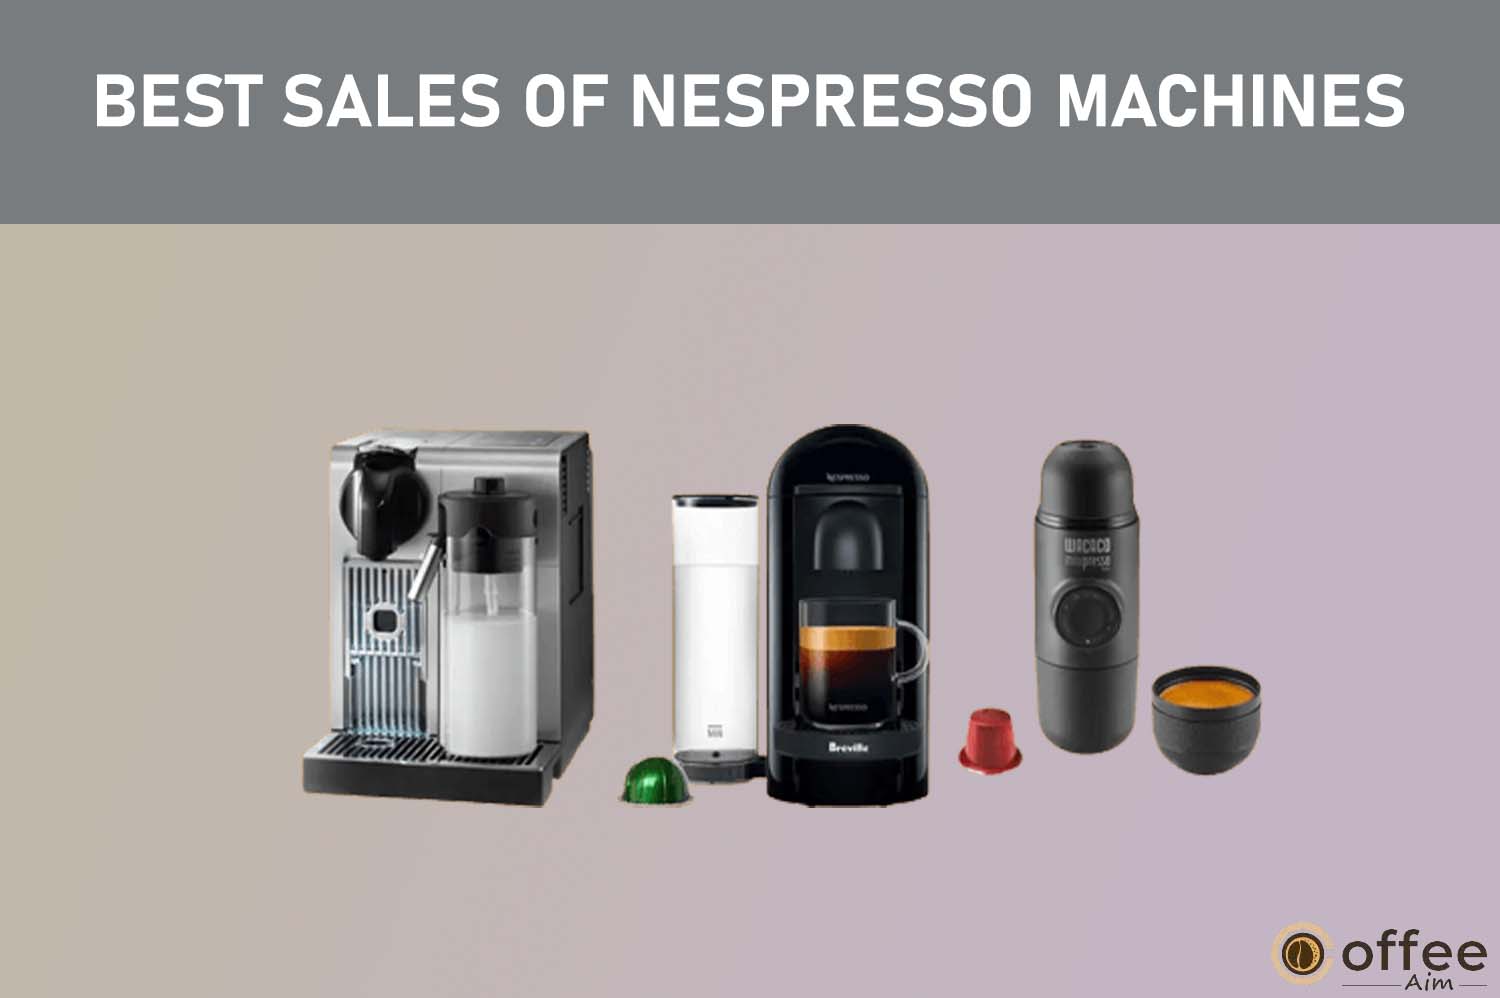 Featured image for the article "Best Sales of Nespresso Machines"